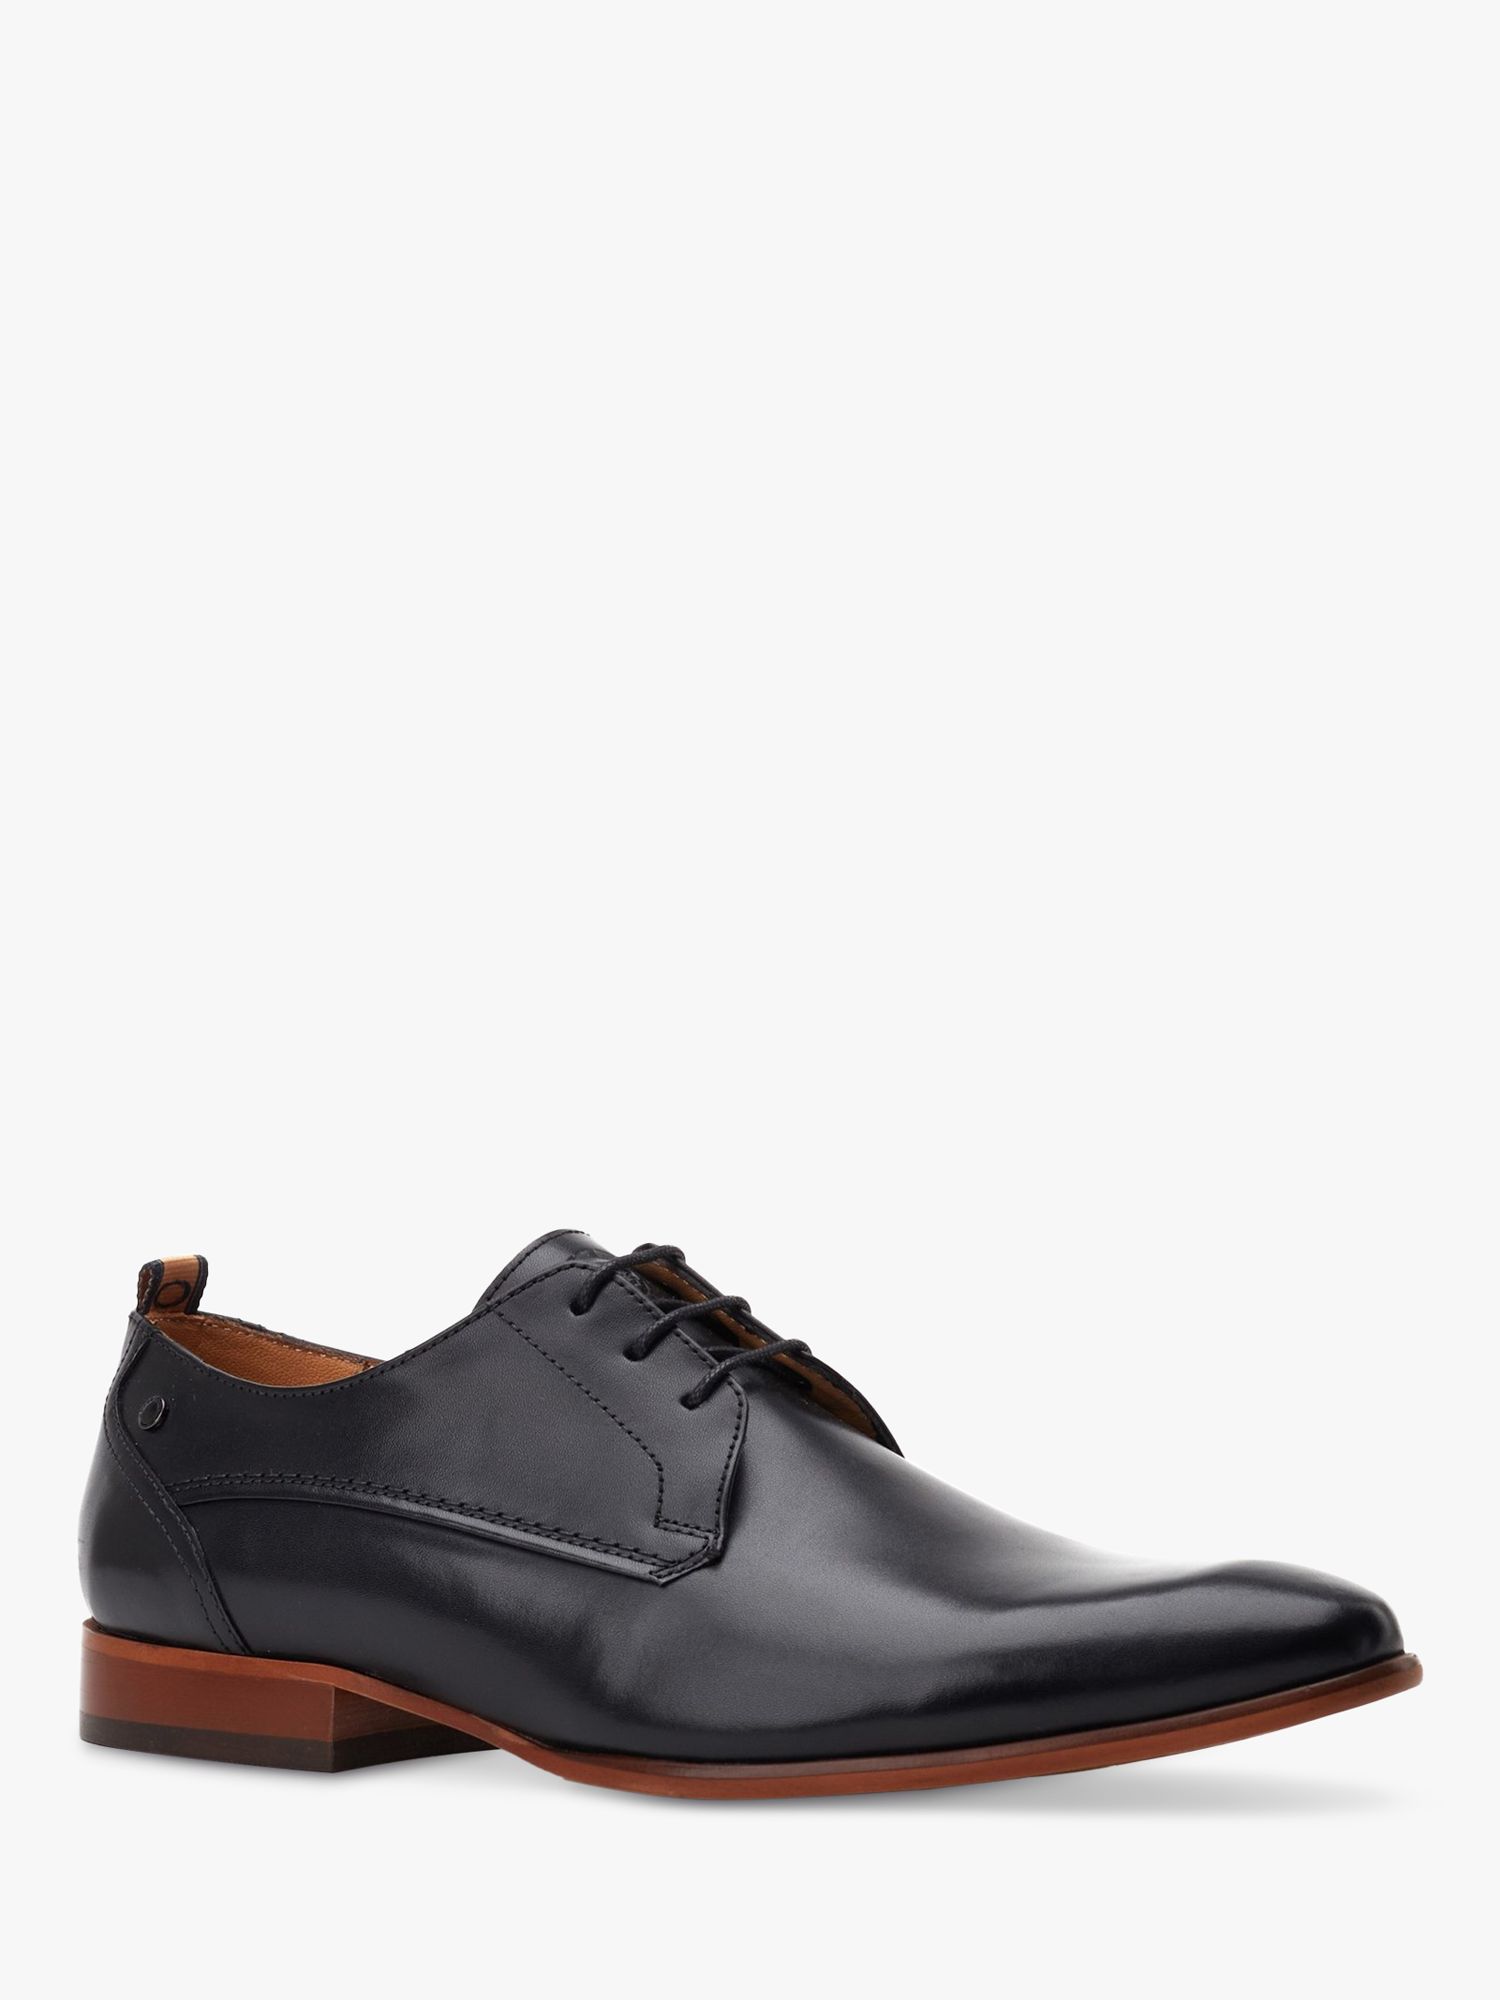 Buy Base London Gambino Lace Up Leather Derby Shoes, Black Online at johnlewis.com